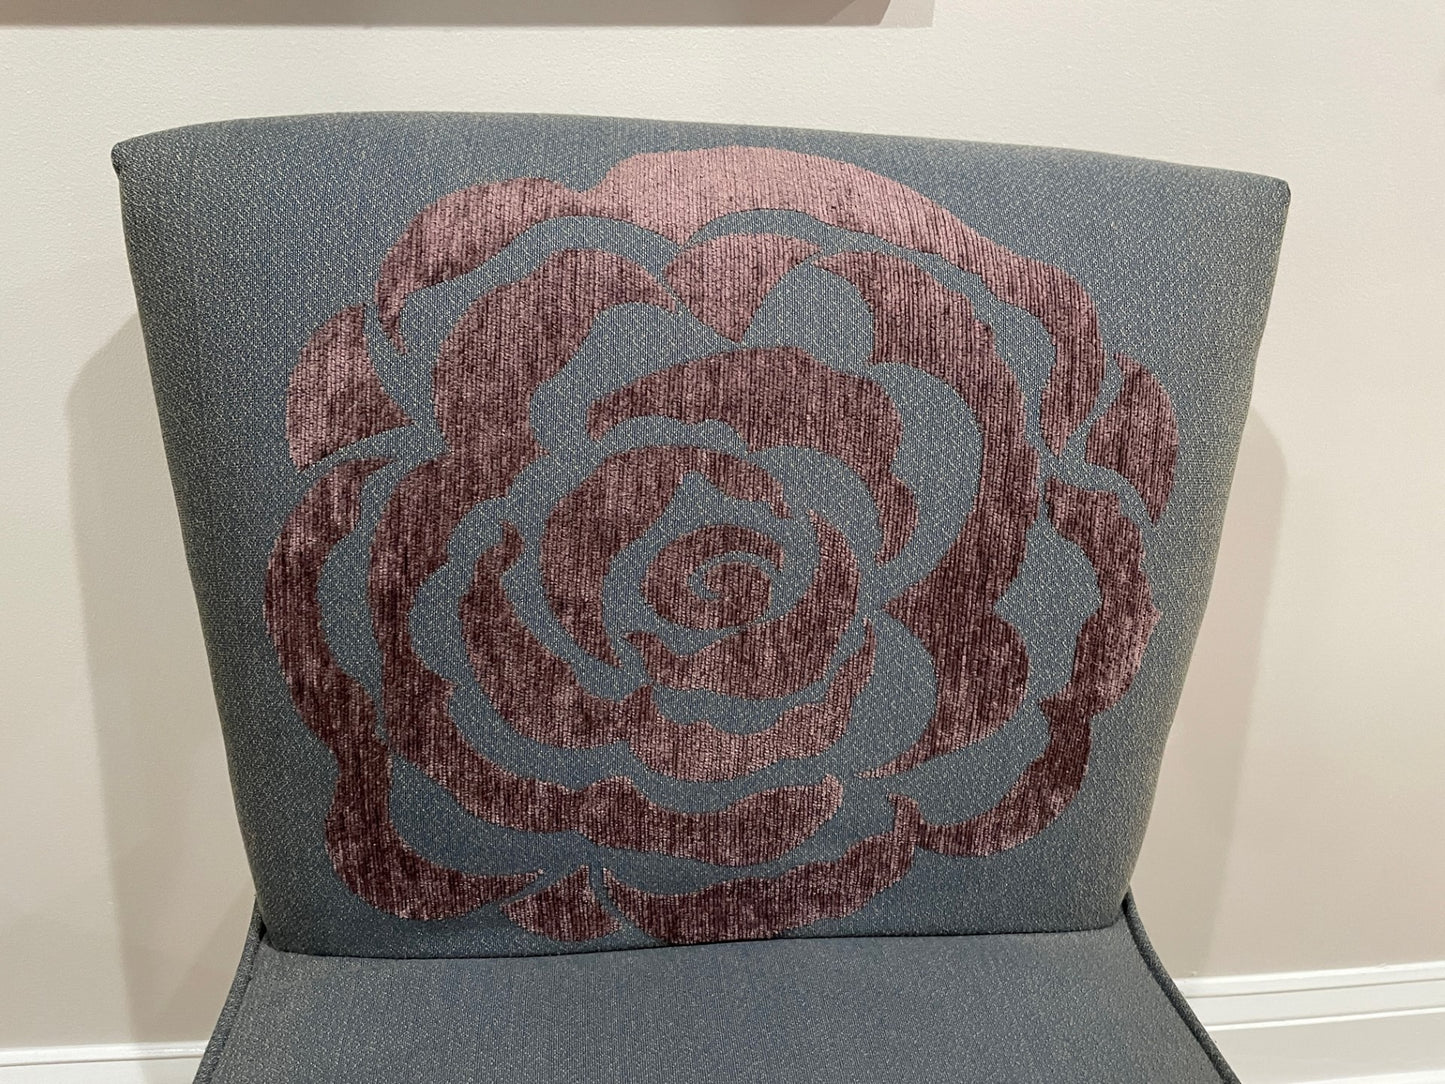 Pair Grey Side Chairs w Rose Embroidery LY200-3